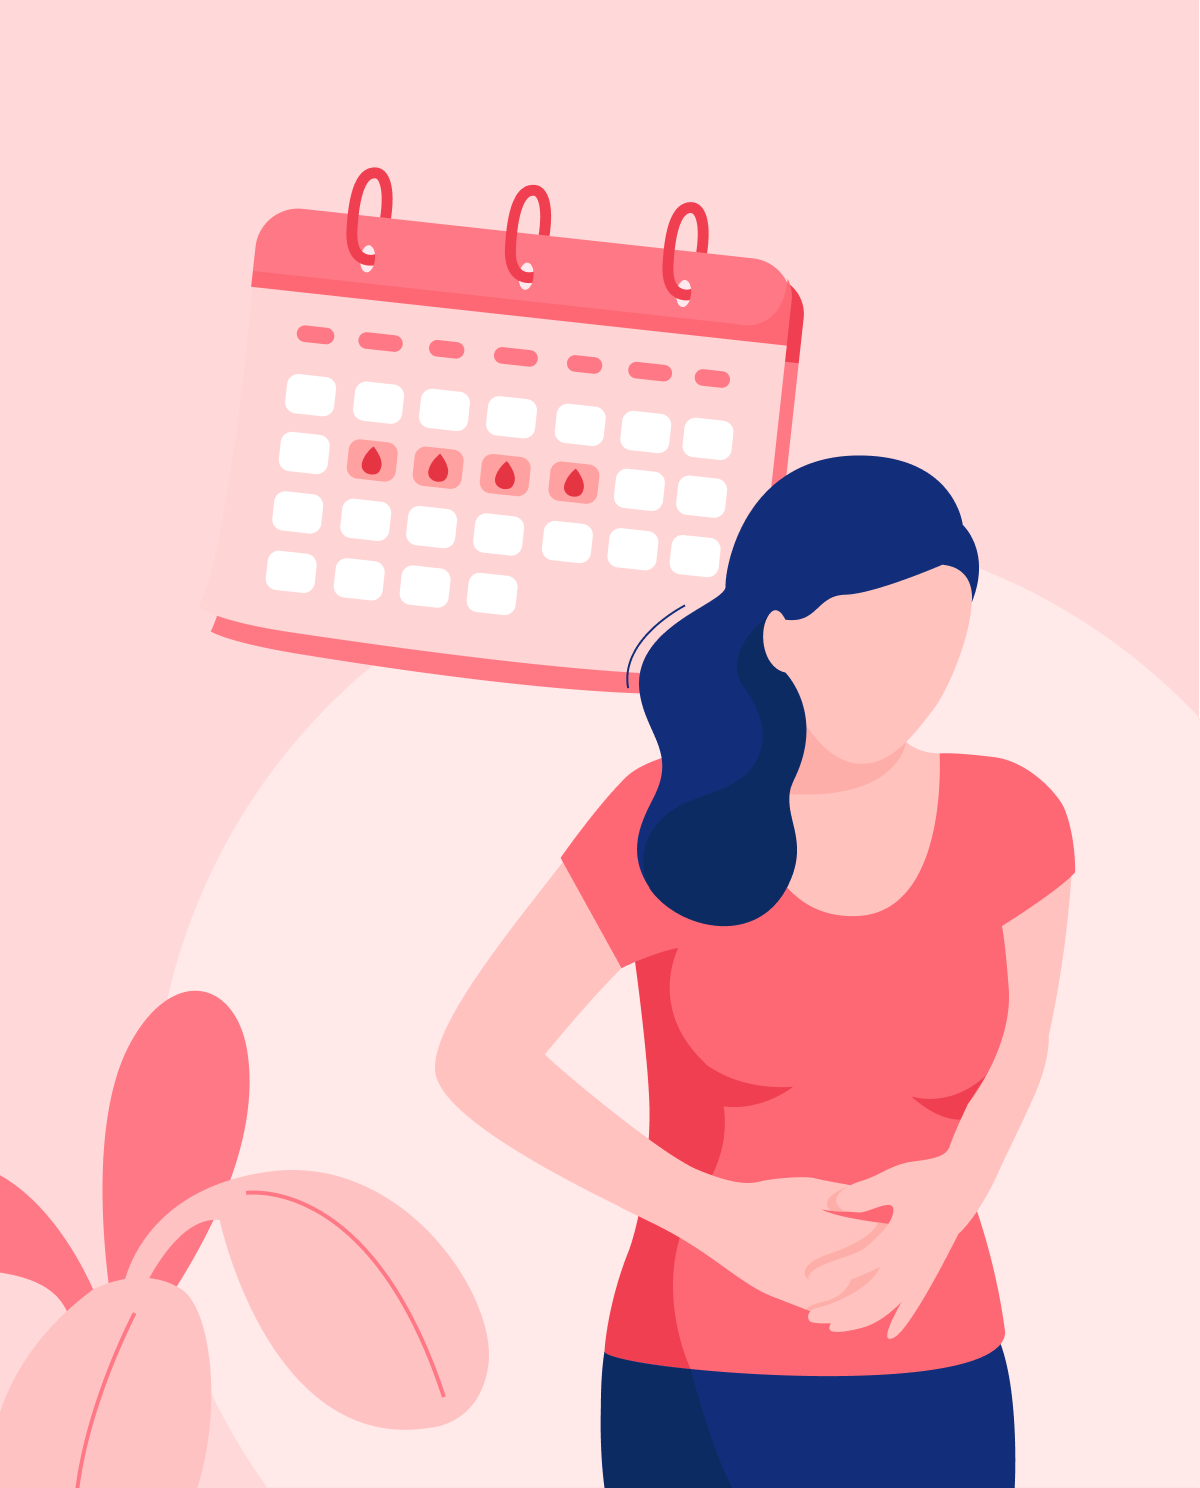 Menstrual abnormalities: causes, diagnosis, and treatments